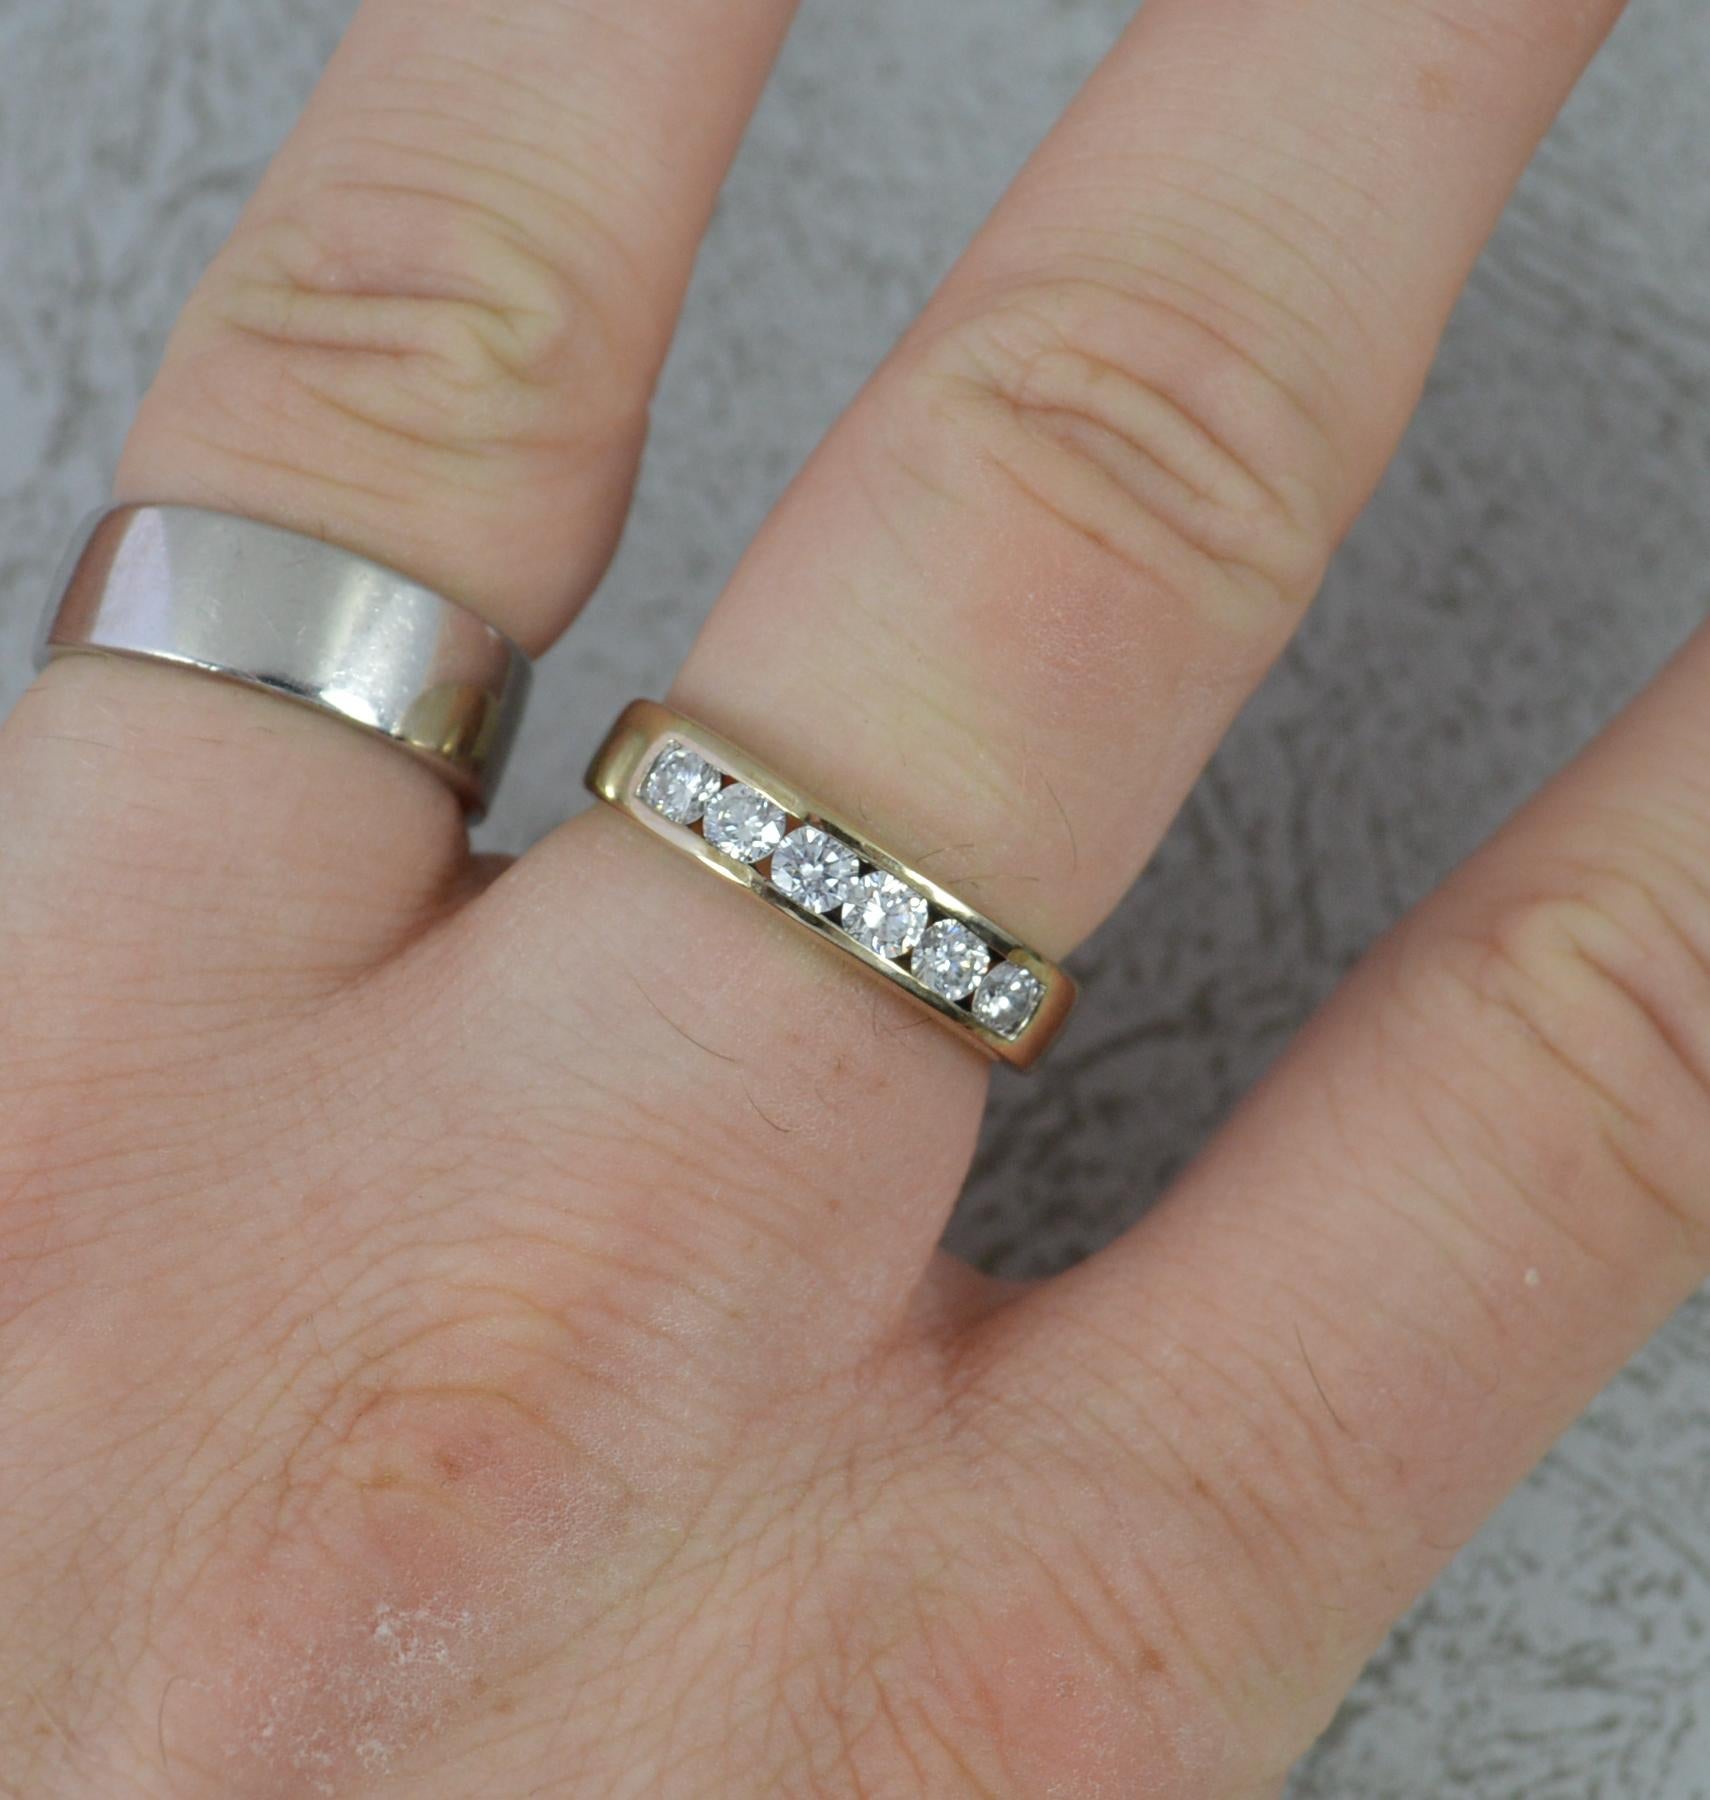 A fine half eternity stack ring.
Solid 18 carat yellow gold shank with an engraved finish to each side of the white gold head.
Set with seven natural princess cut diamonds to total 0.6cts, vs clarity, g-h colour.
17mm spread of stones. 4mm wide band